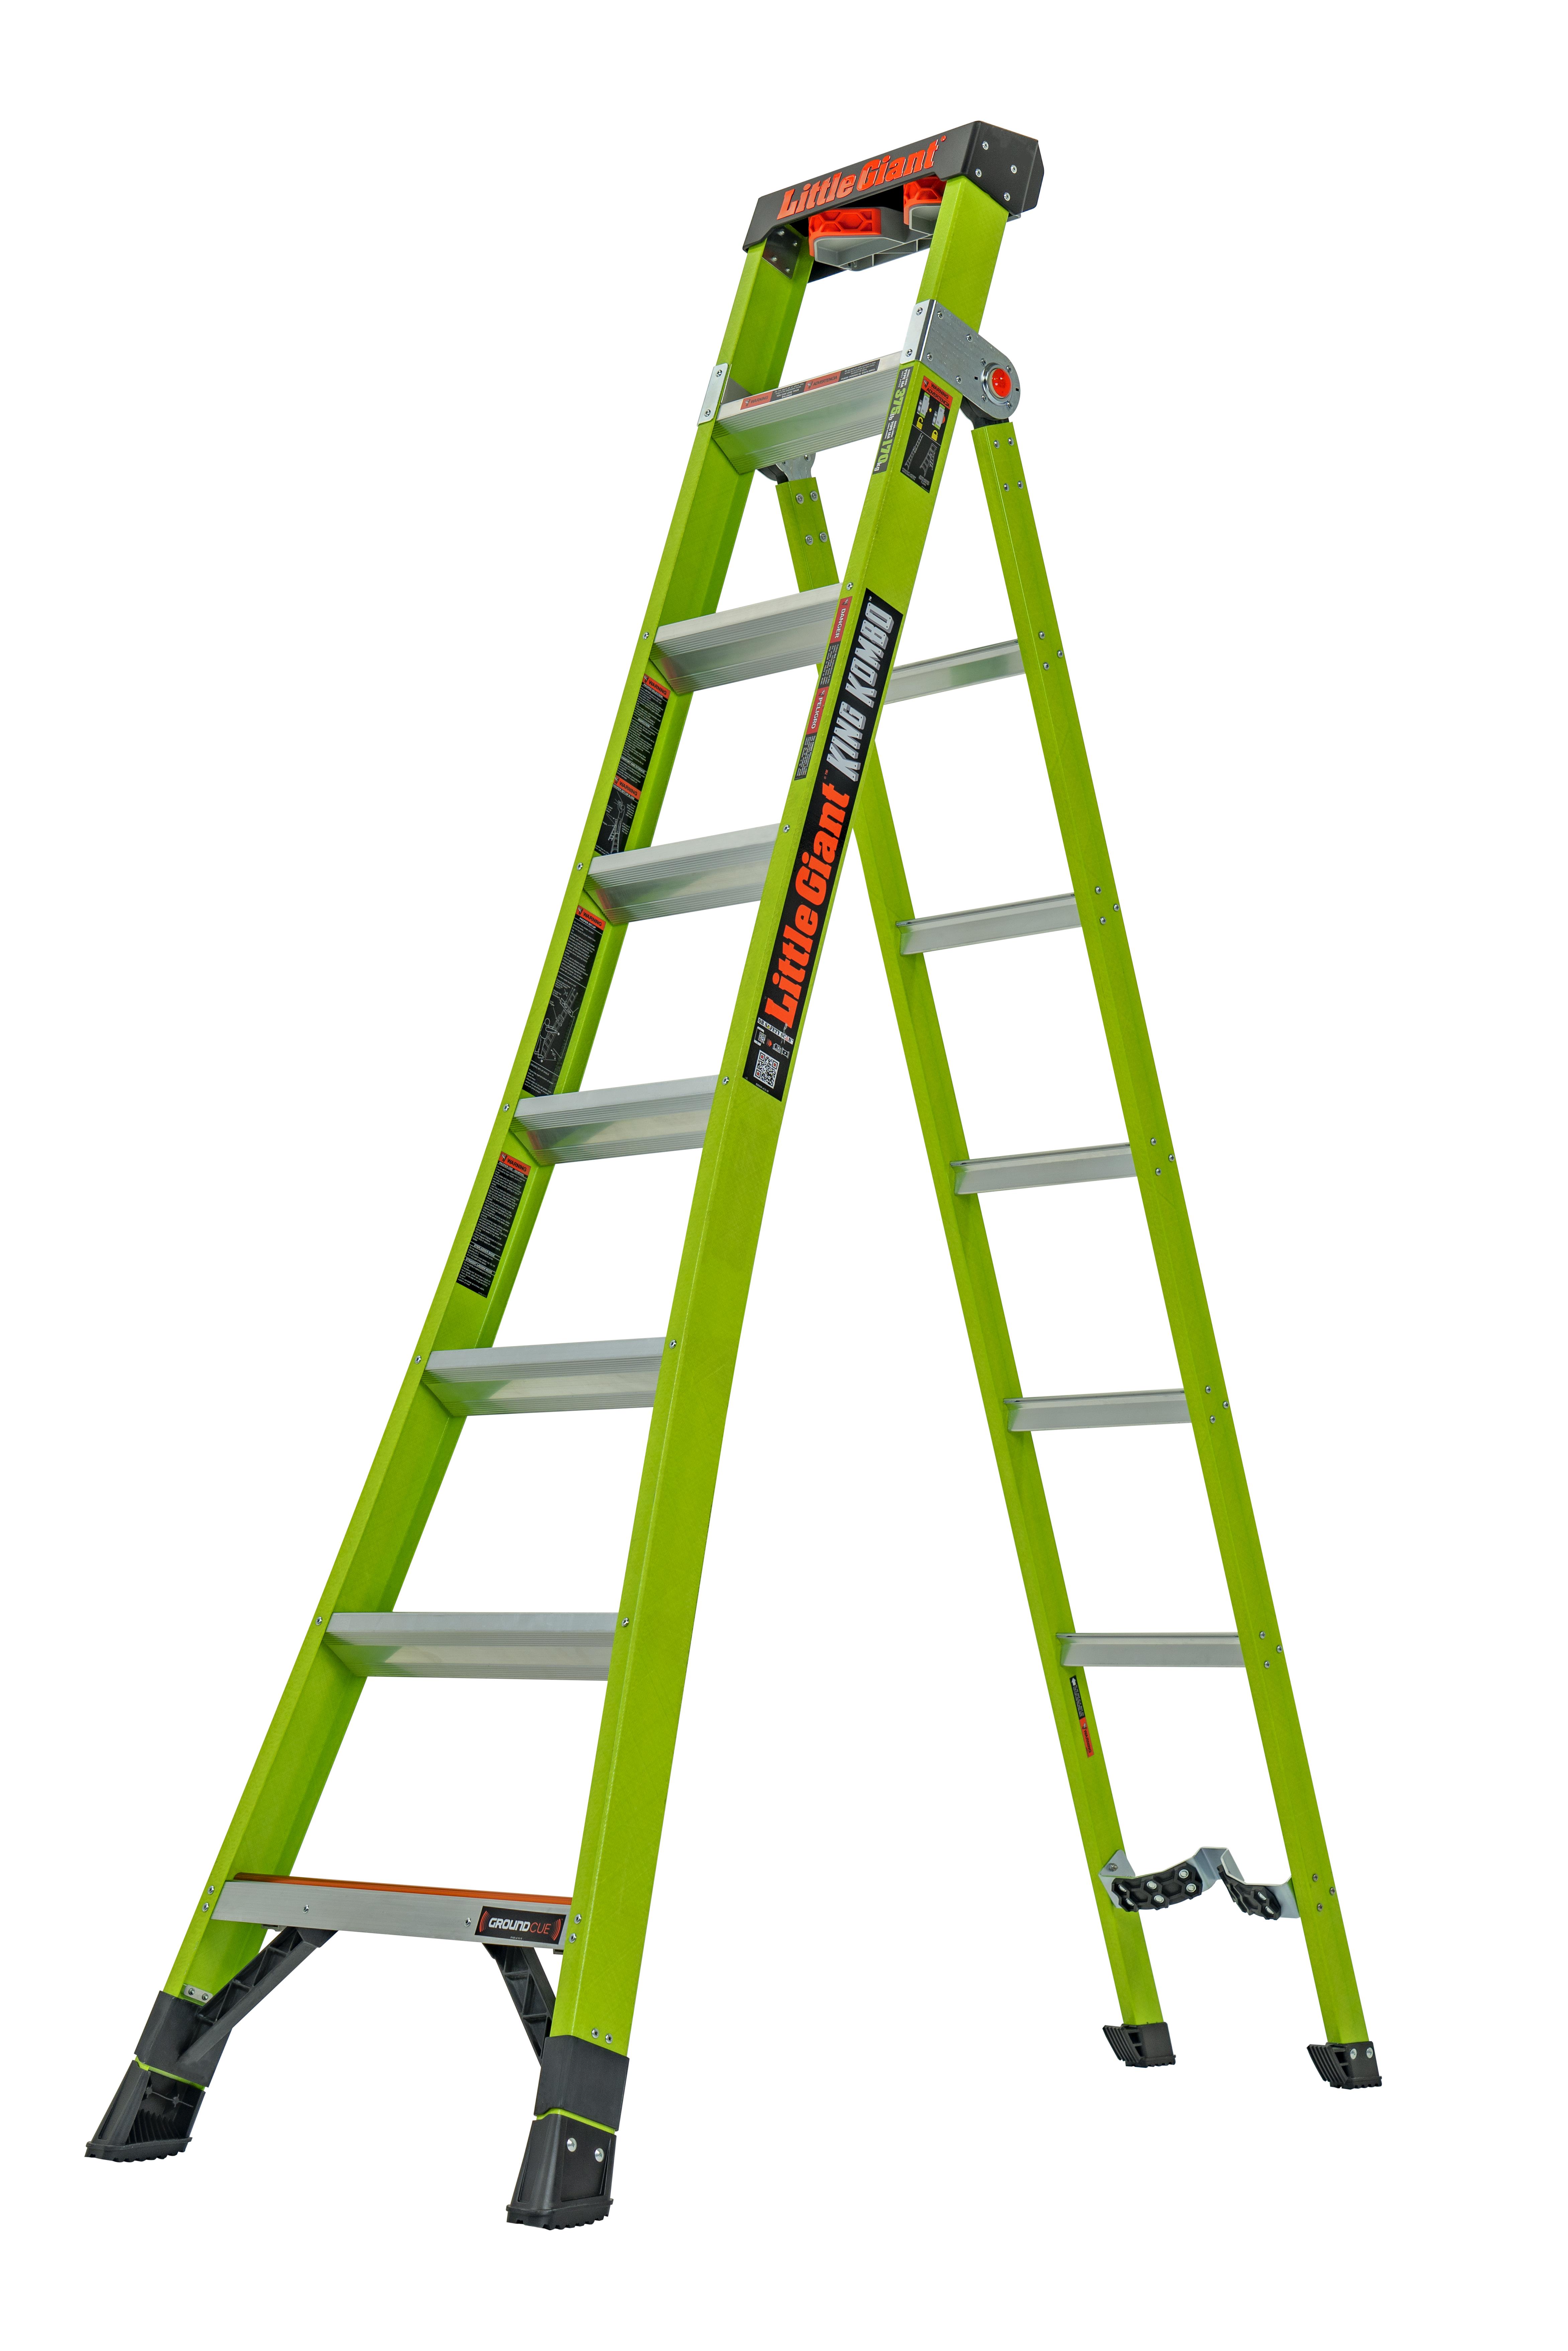 KING KOMBO INDUSTRIAL 8' 3-IN-1 LADDER - Tagged Gloves